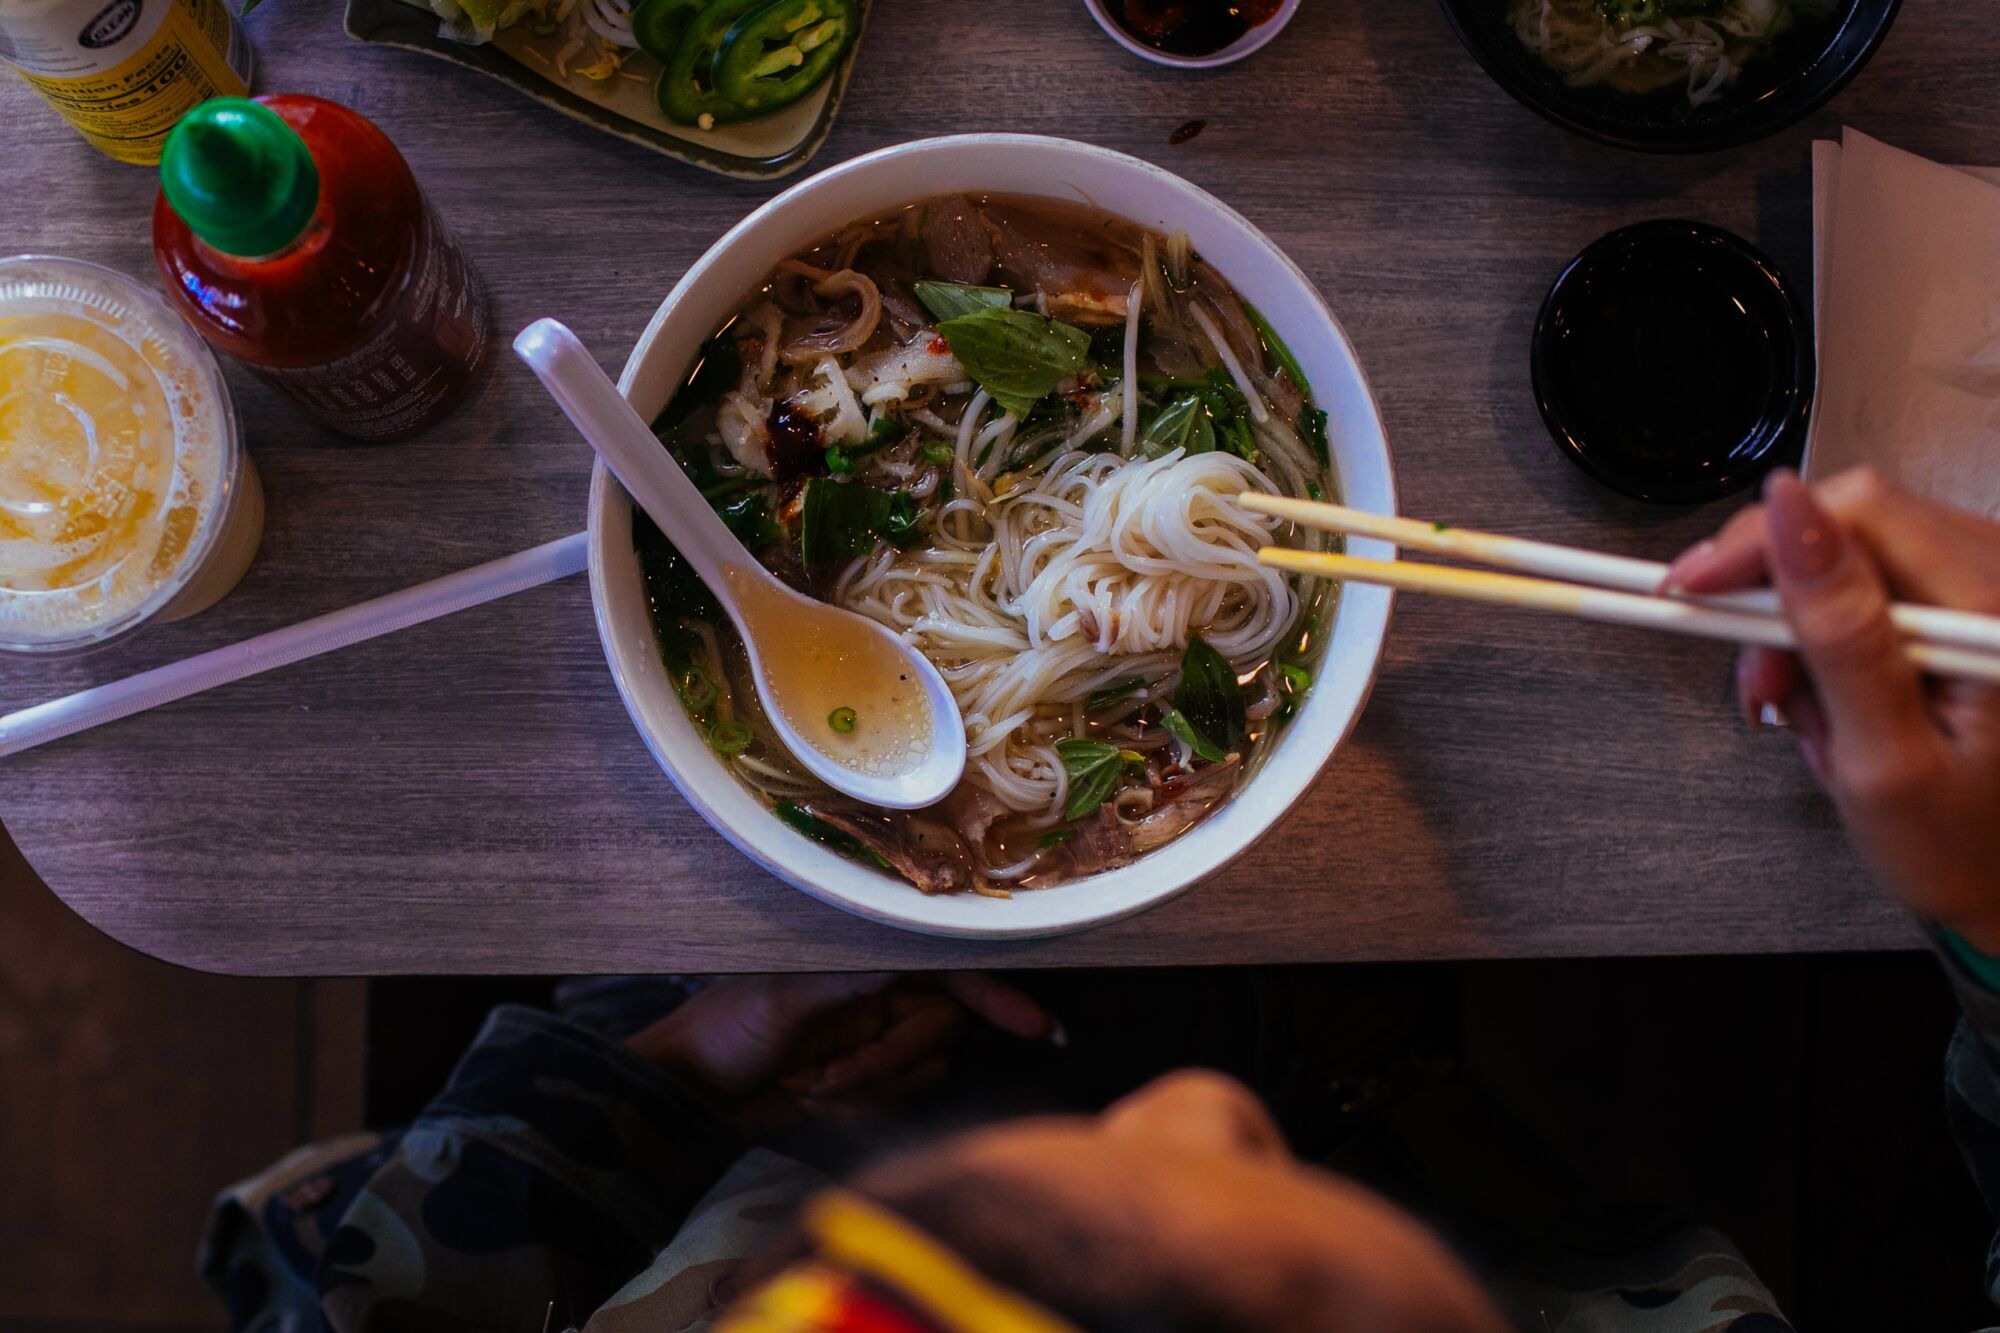 A person uses chopsticks to eat from a bowl of pho.